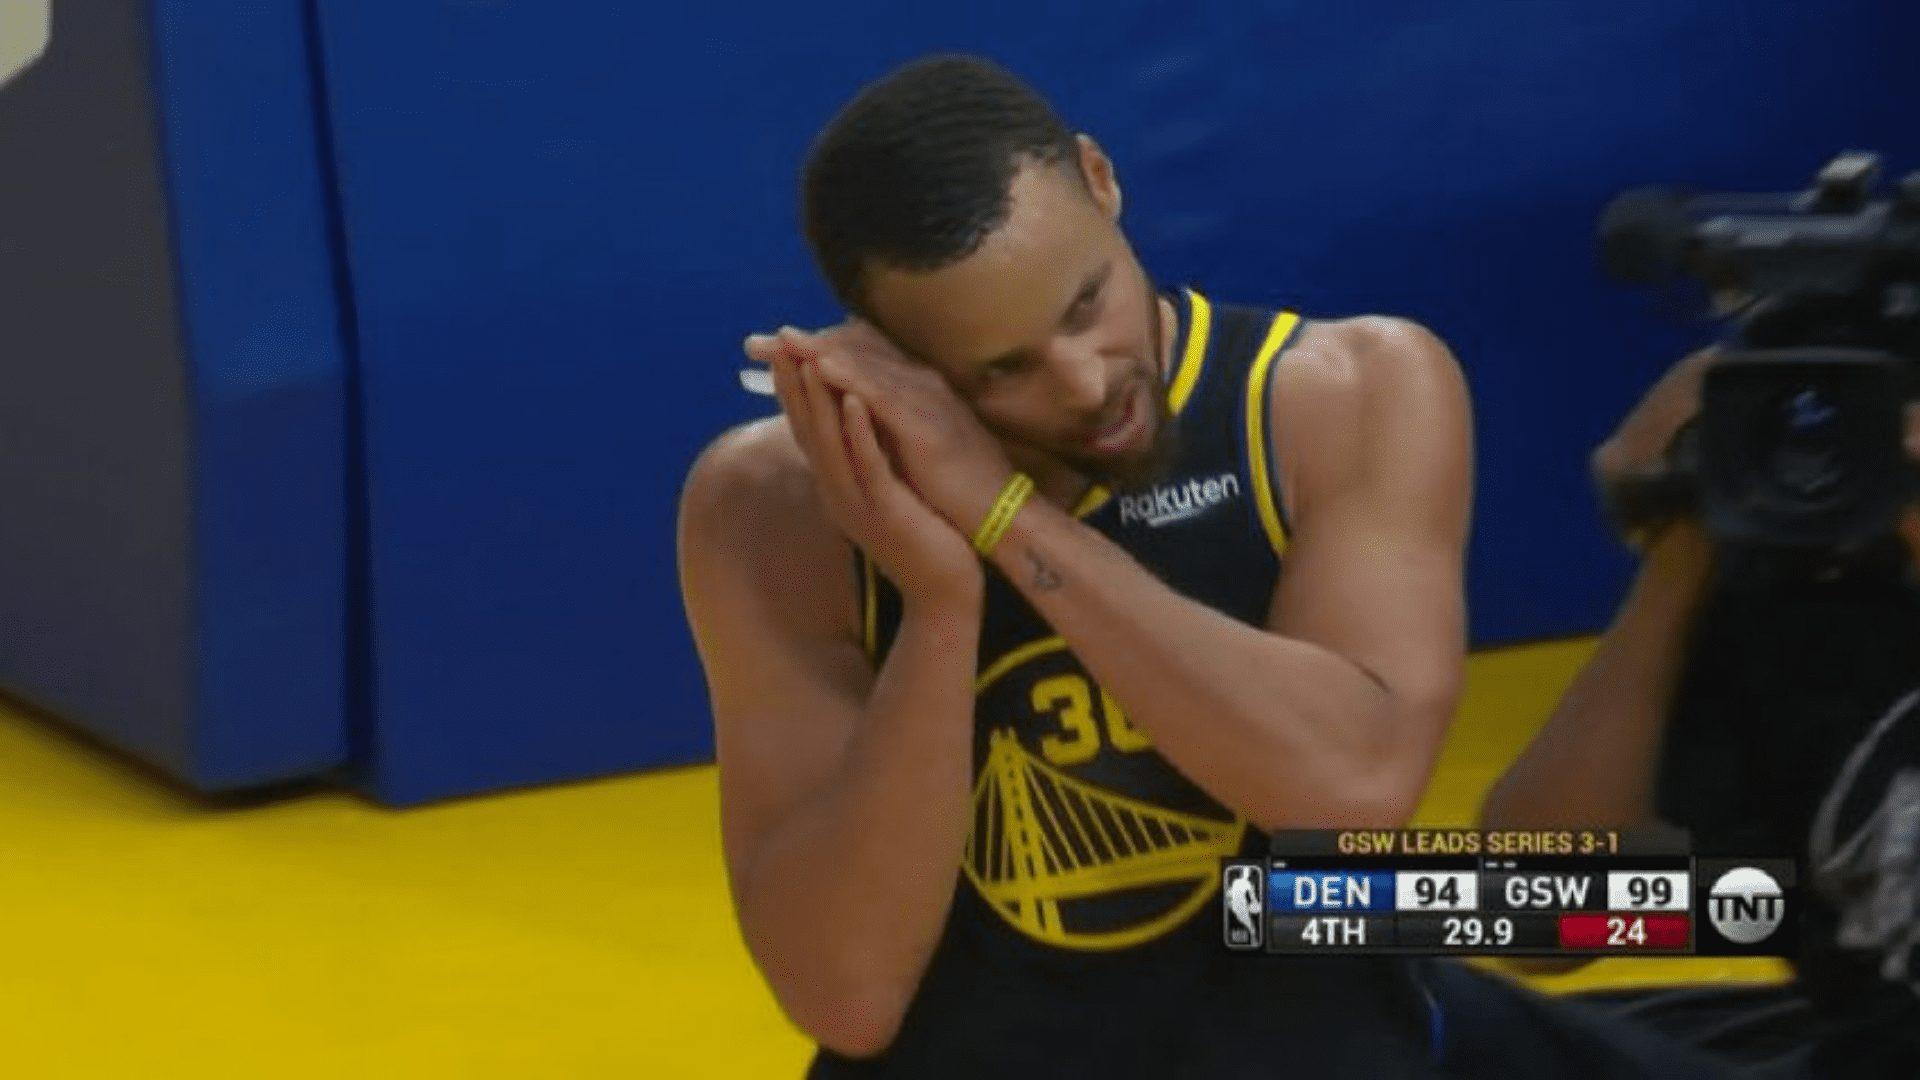 Stephen Curry 28 avril 2022